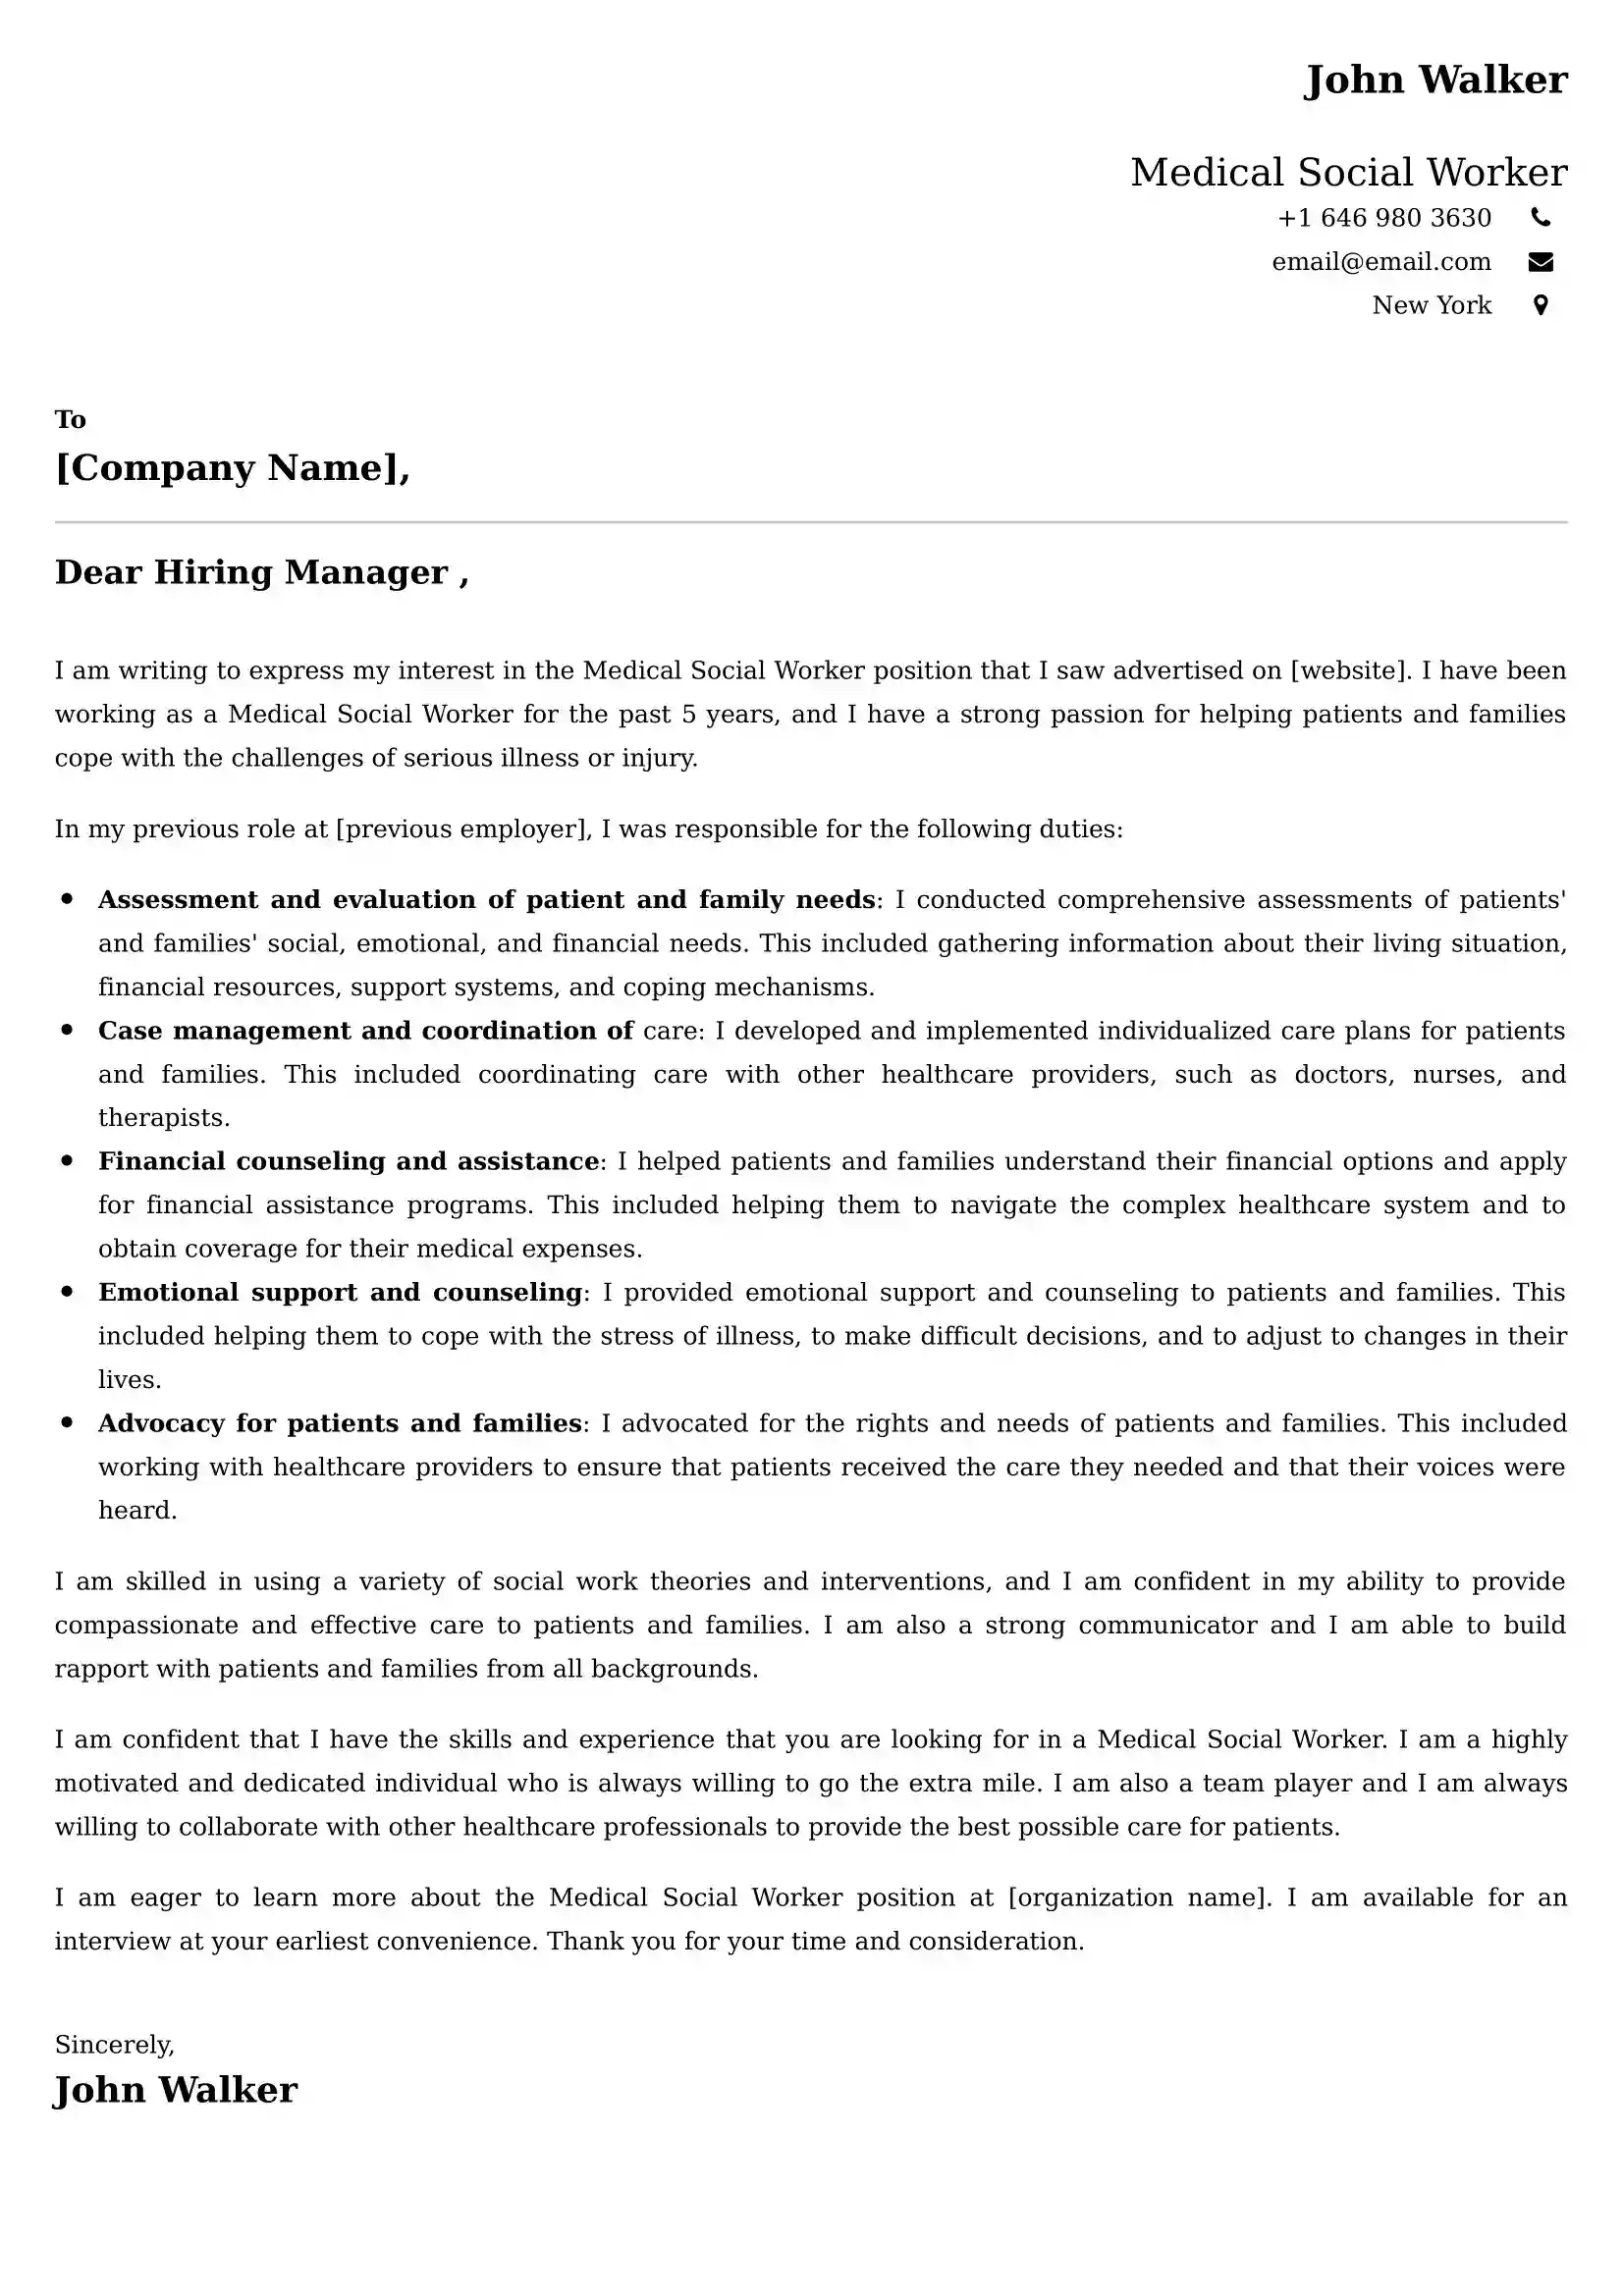 Medical Social Worker Cover Letter Examples India